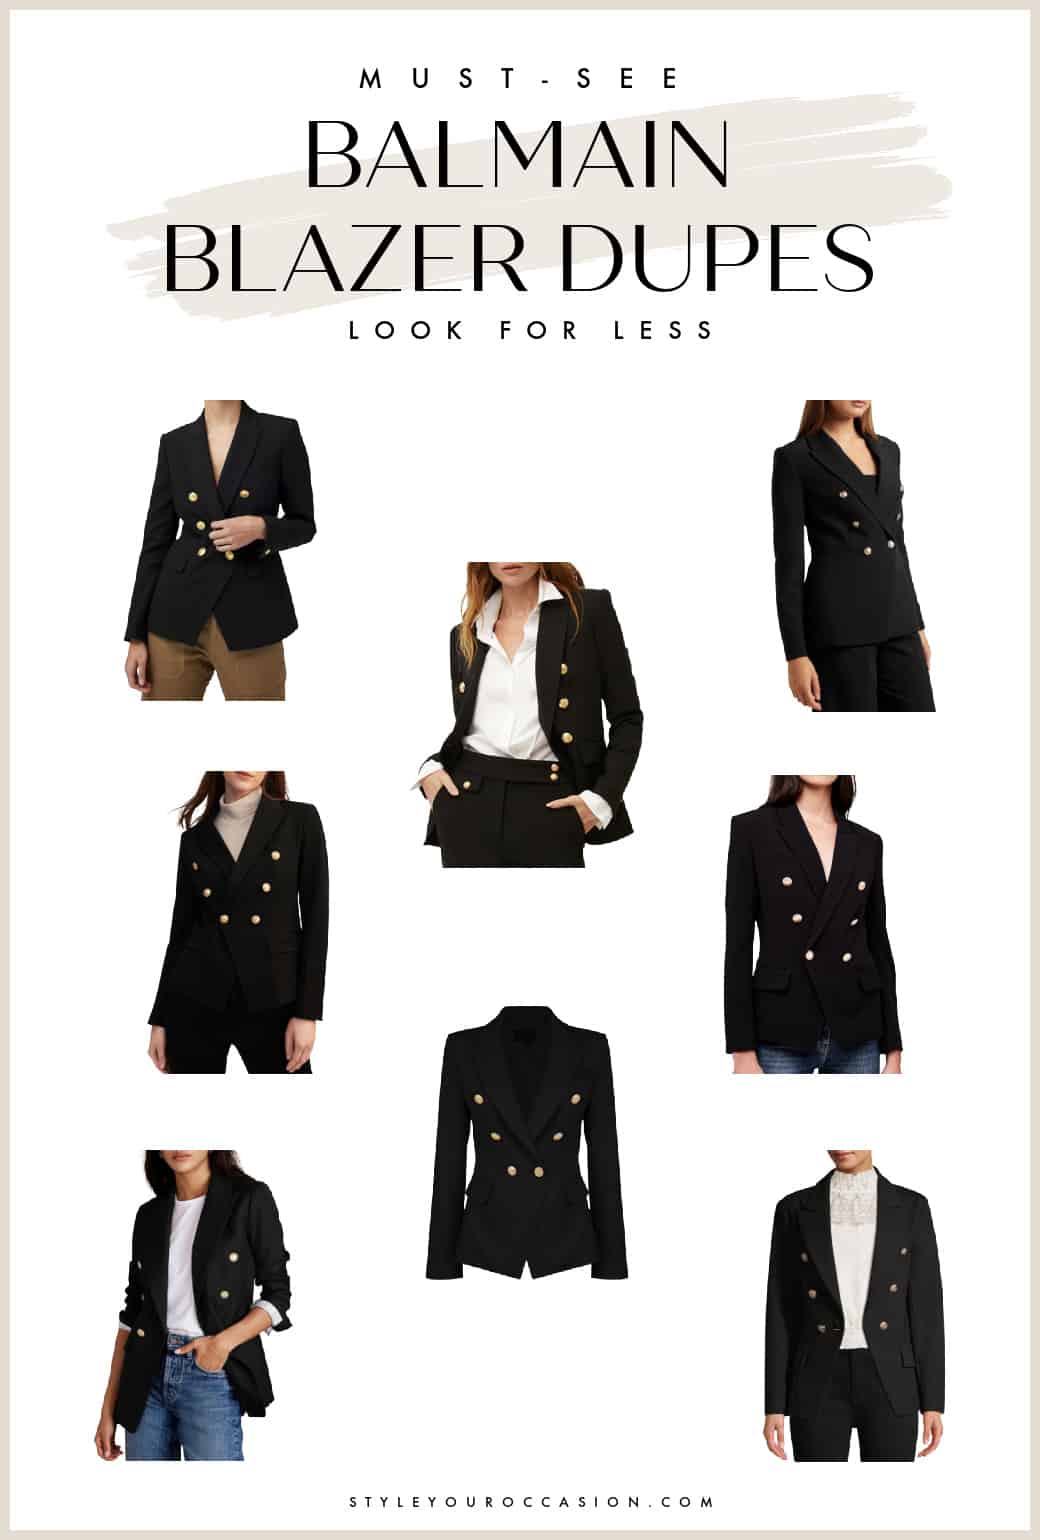 collage of women wearing black blazers with gold buttons and text overlay "Must-see Balmain Blazer Dupes"